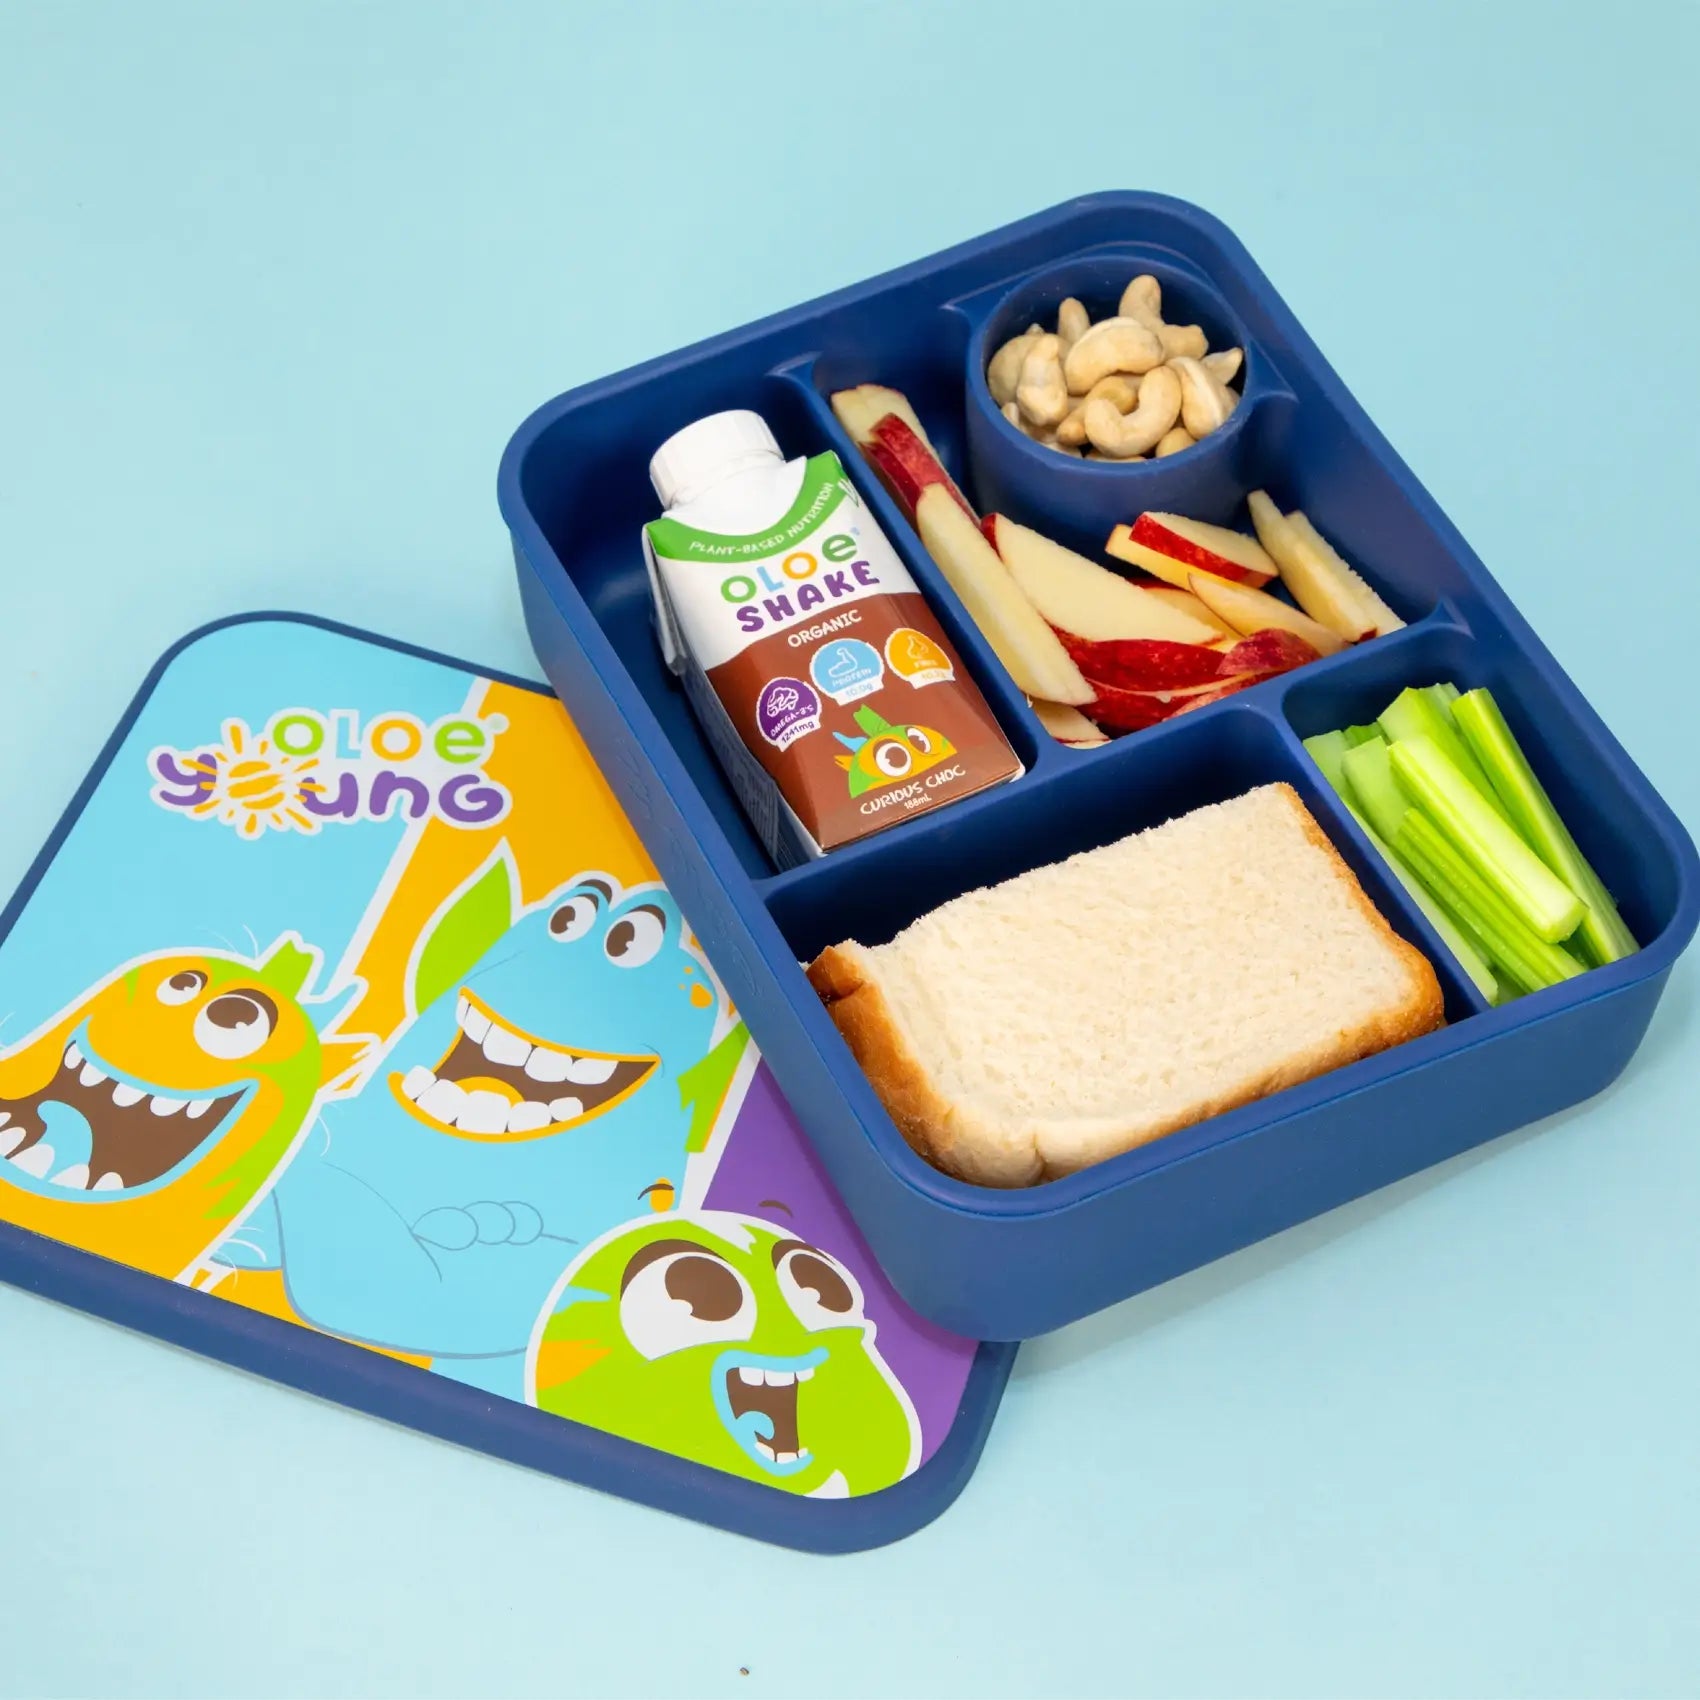 oloe-character-silicone-lunchbox-navy-product-shot-showing-food-and-oloe-shake-inside